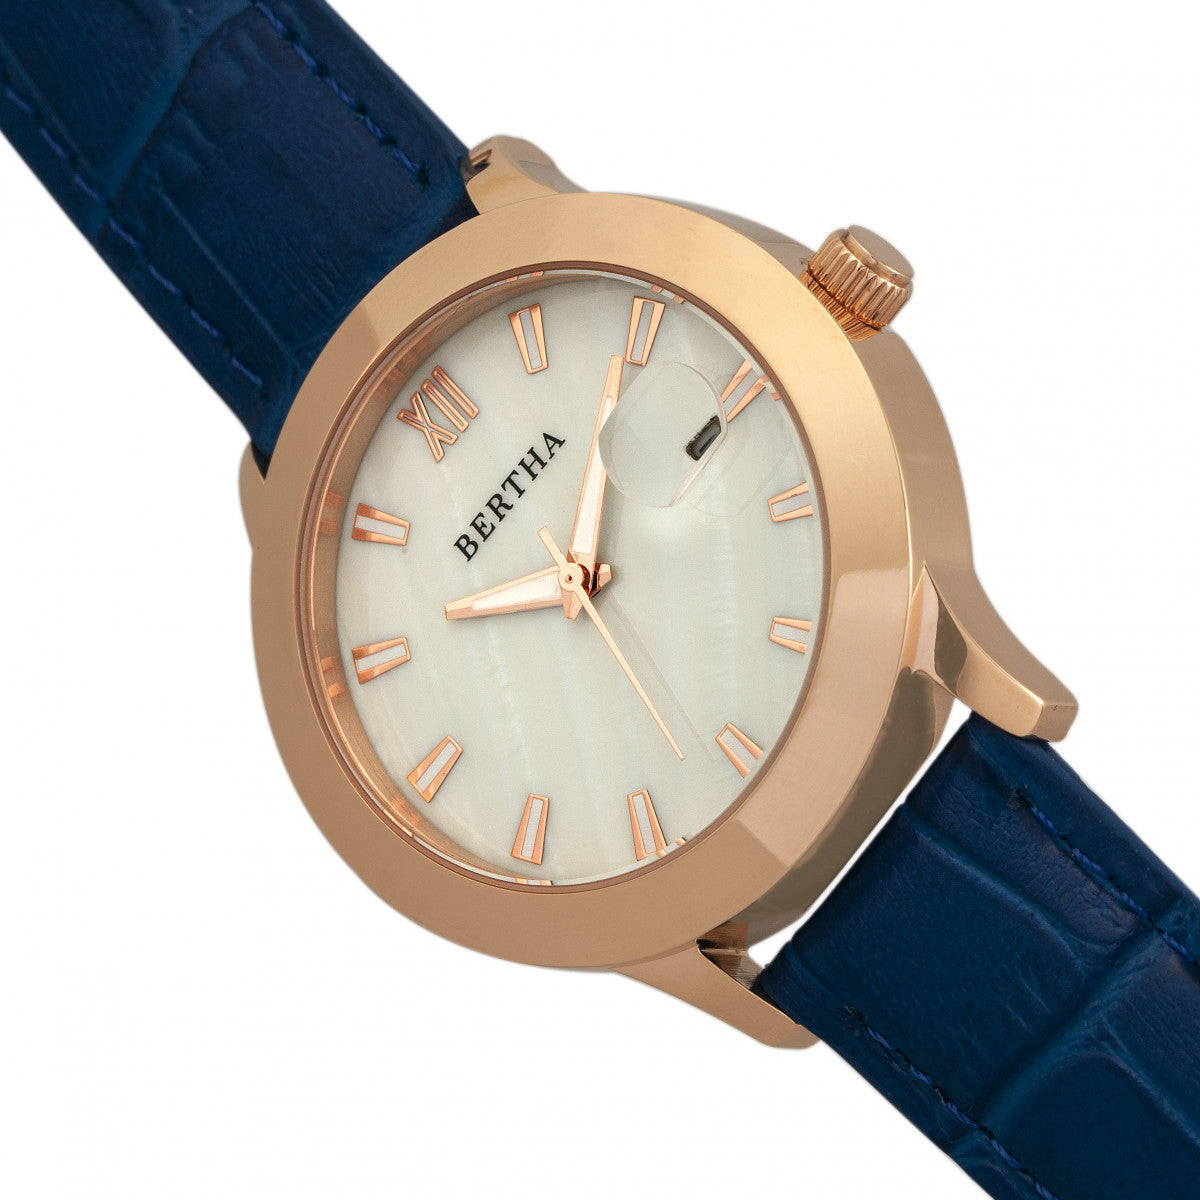 Bertha Eden Mother-Of-Pearl Leather-Band Watch w/Date - Blue/Rose Gold - BTHBR6506